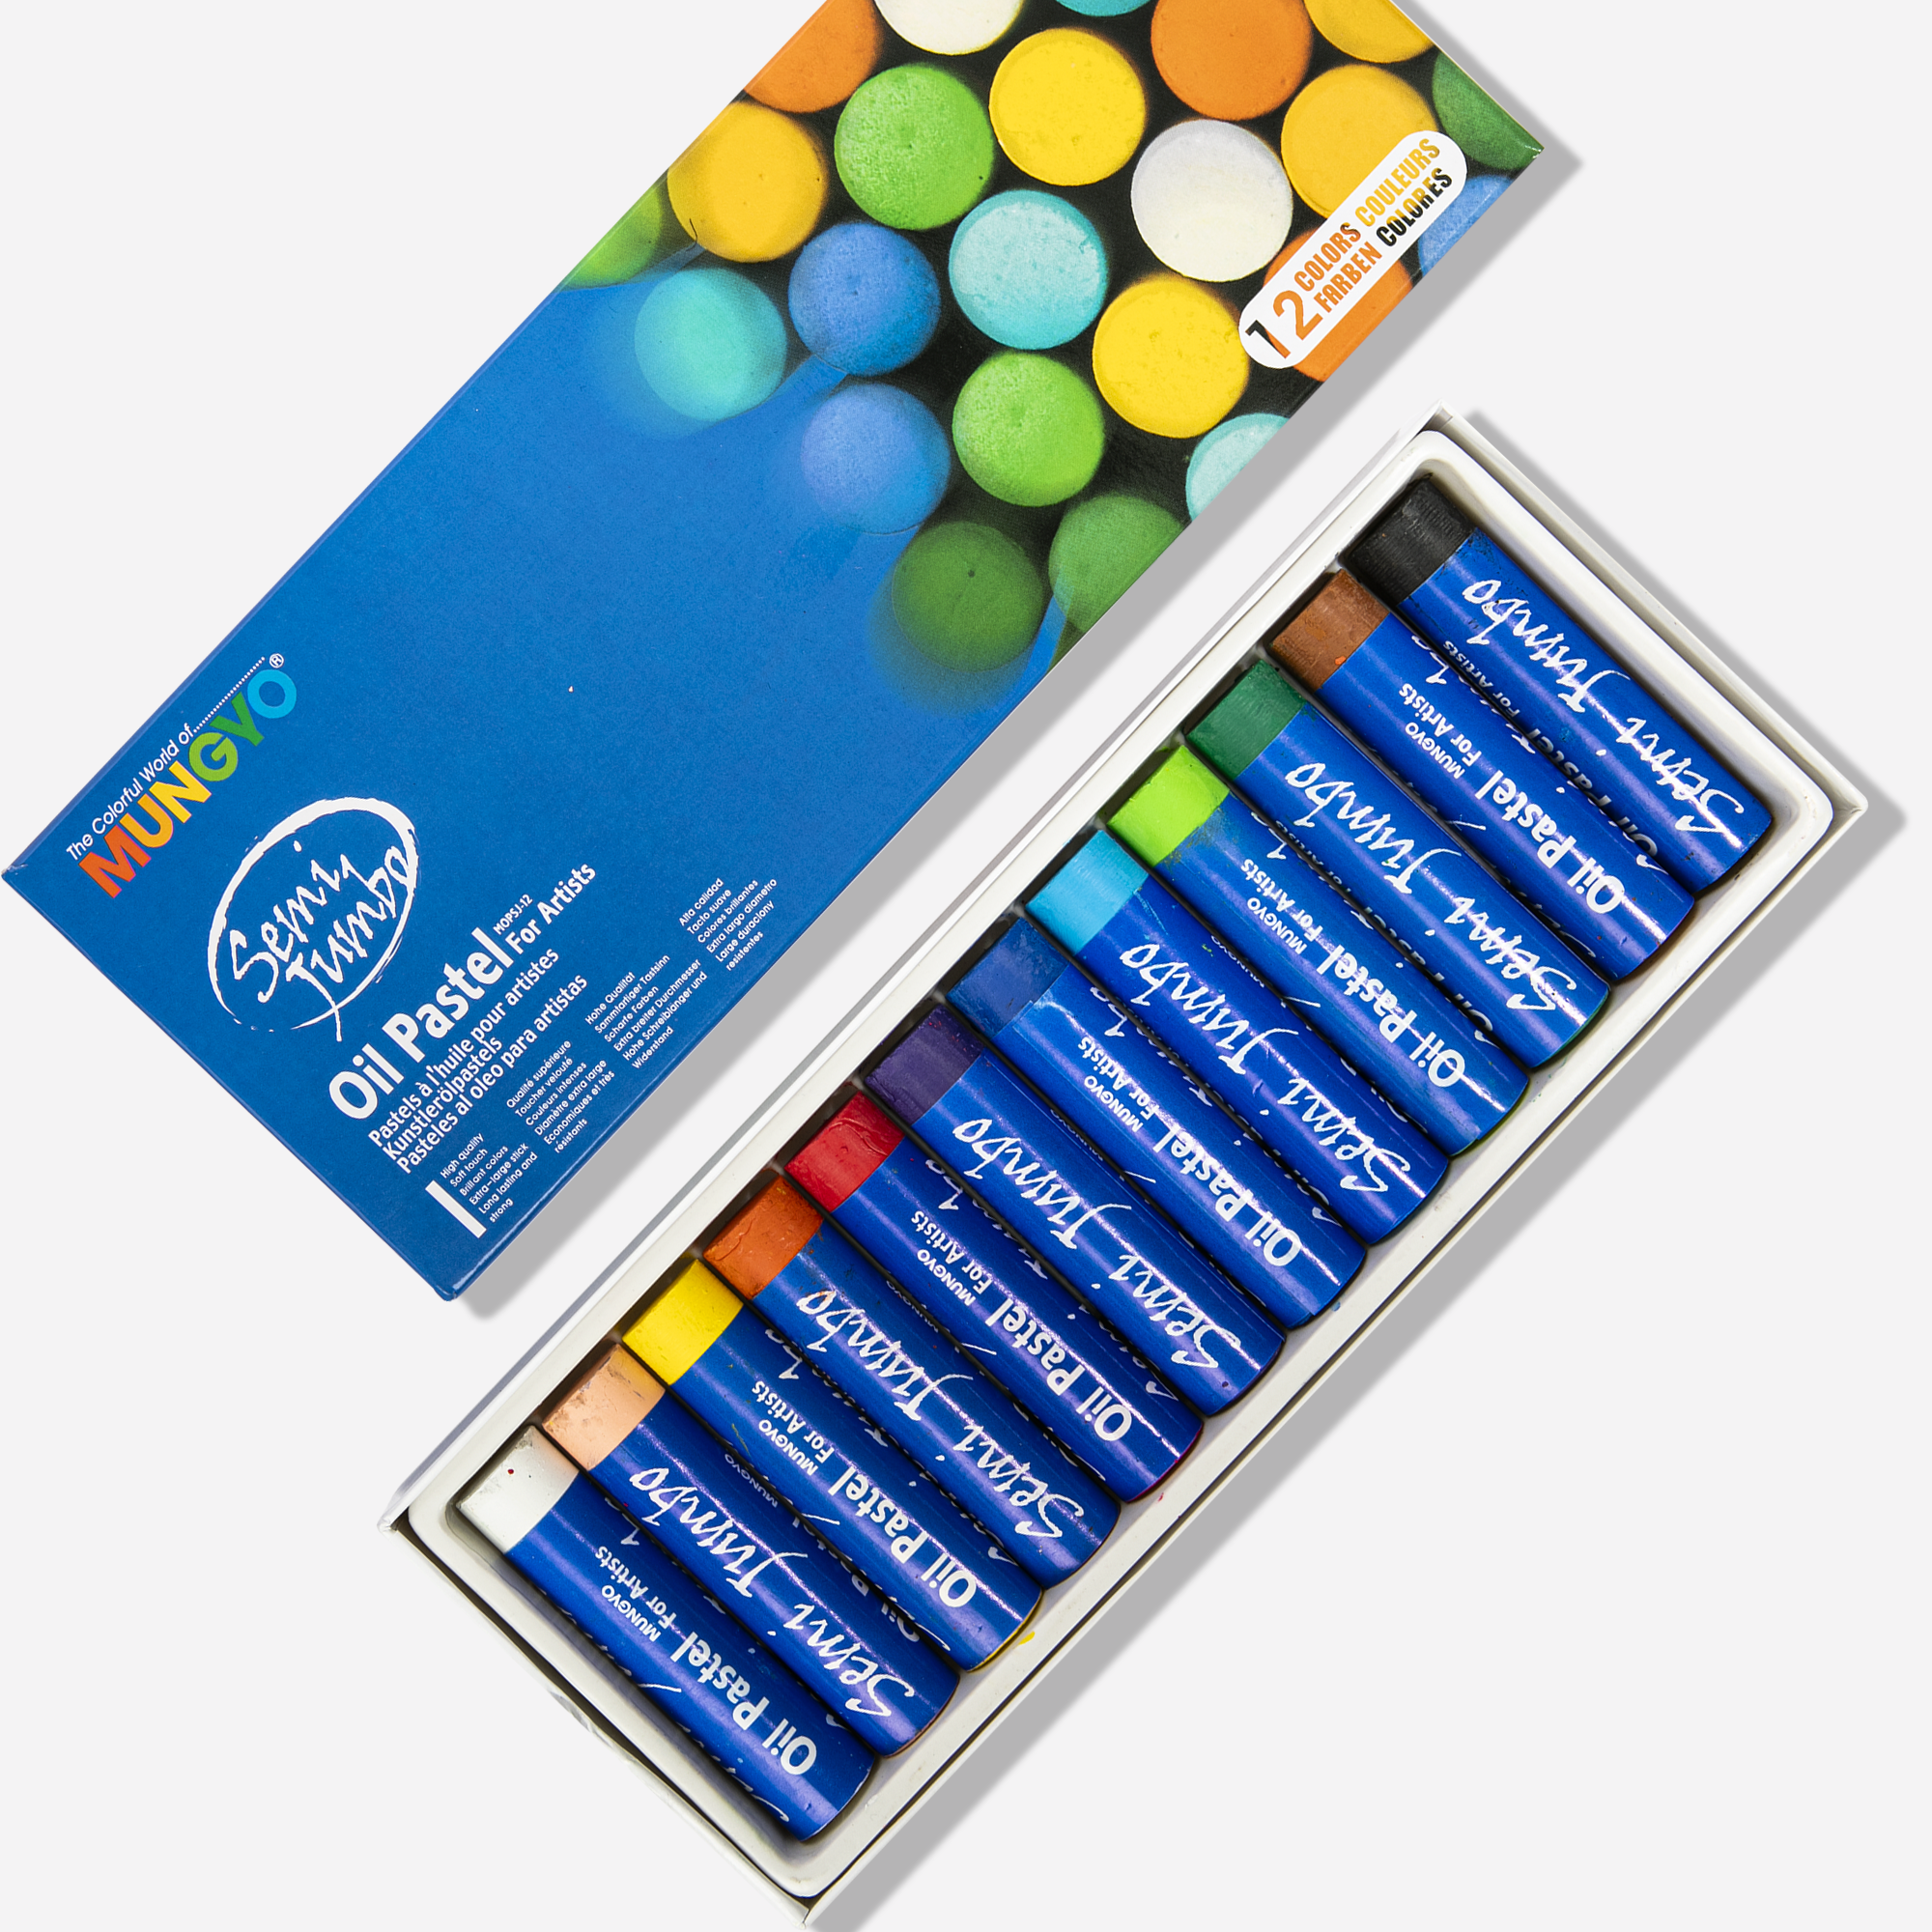 Buy the newest Mungyo Semi Jumbo Oil Pastels Set of 12 569 at Great Prices